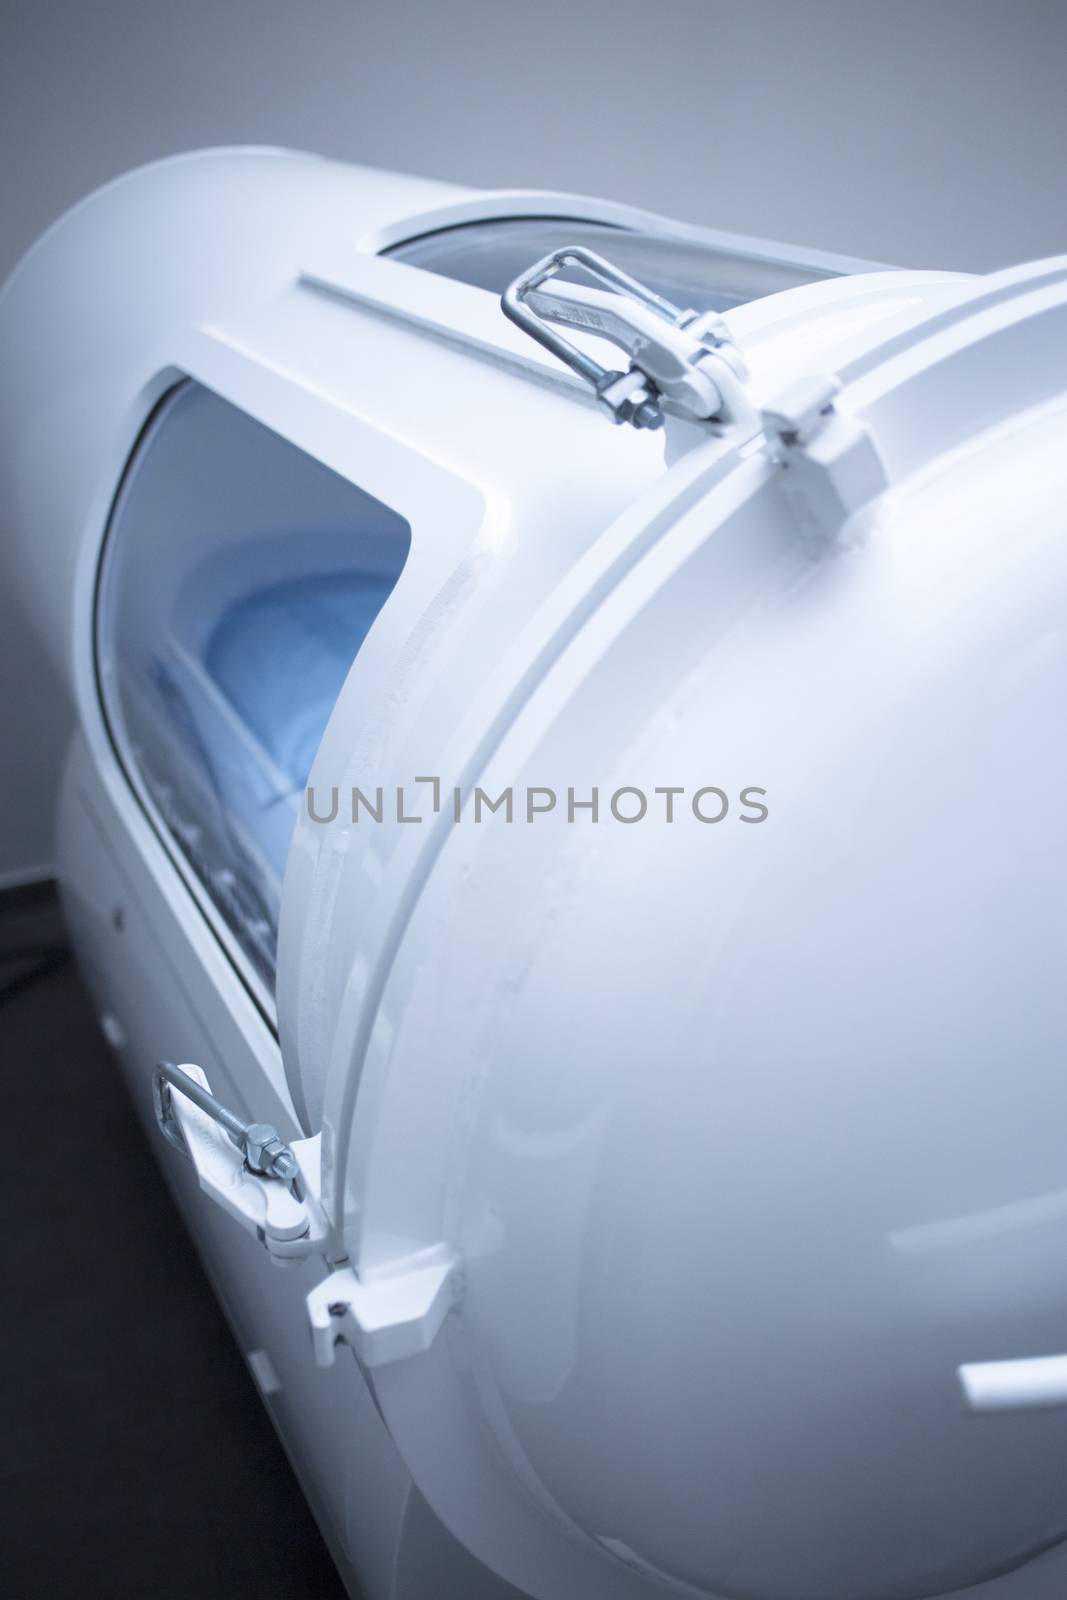 HBOT Hyperbaric Oxygen Therapy treatment chamber by edwardolive